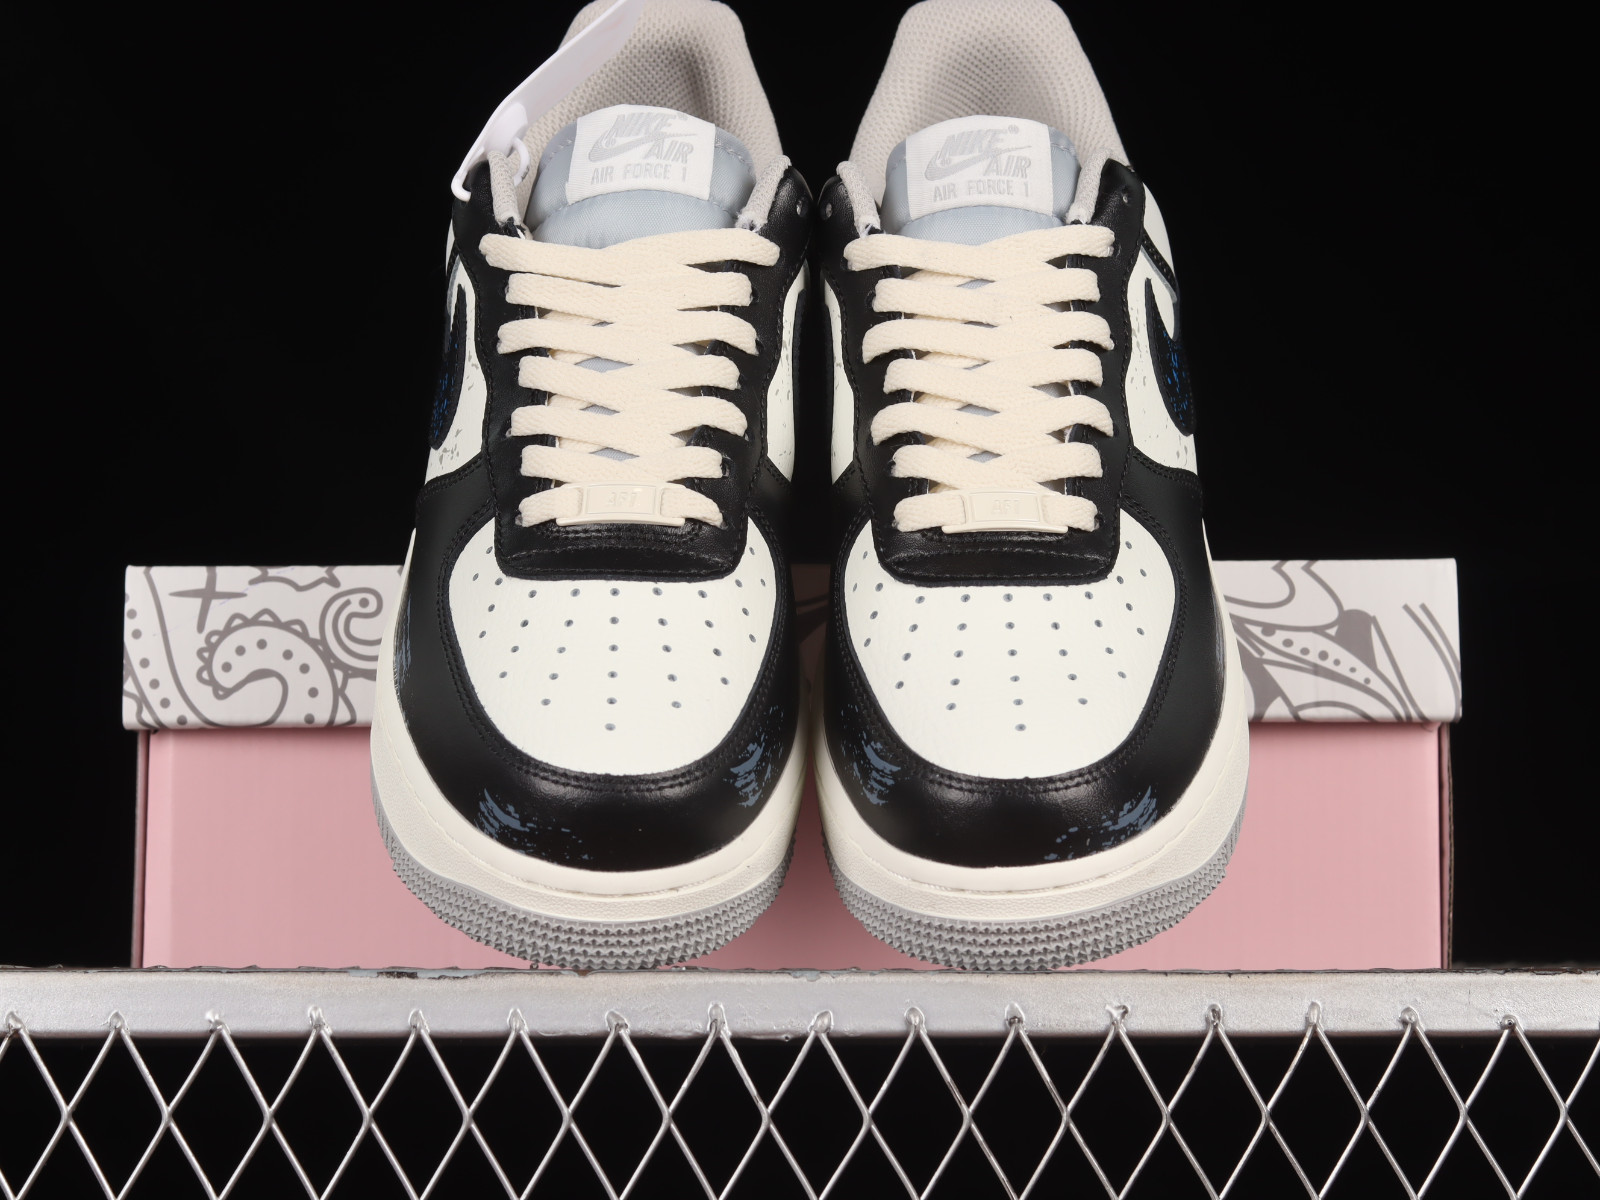 accesorios aeropuerto Campaña Ariss-euShops - 920 - Nike layer Air Force 1 07 Low Rice White Black Blue  LT6986 - boys pull on nike sneakers for girls women fashion